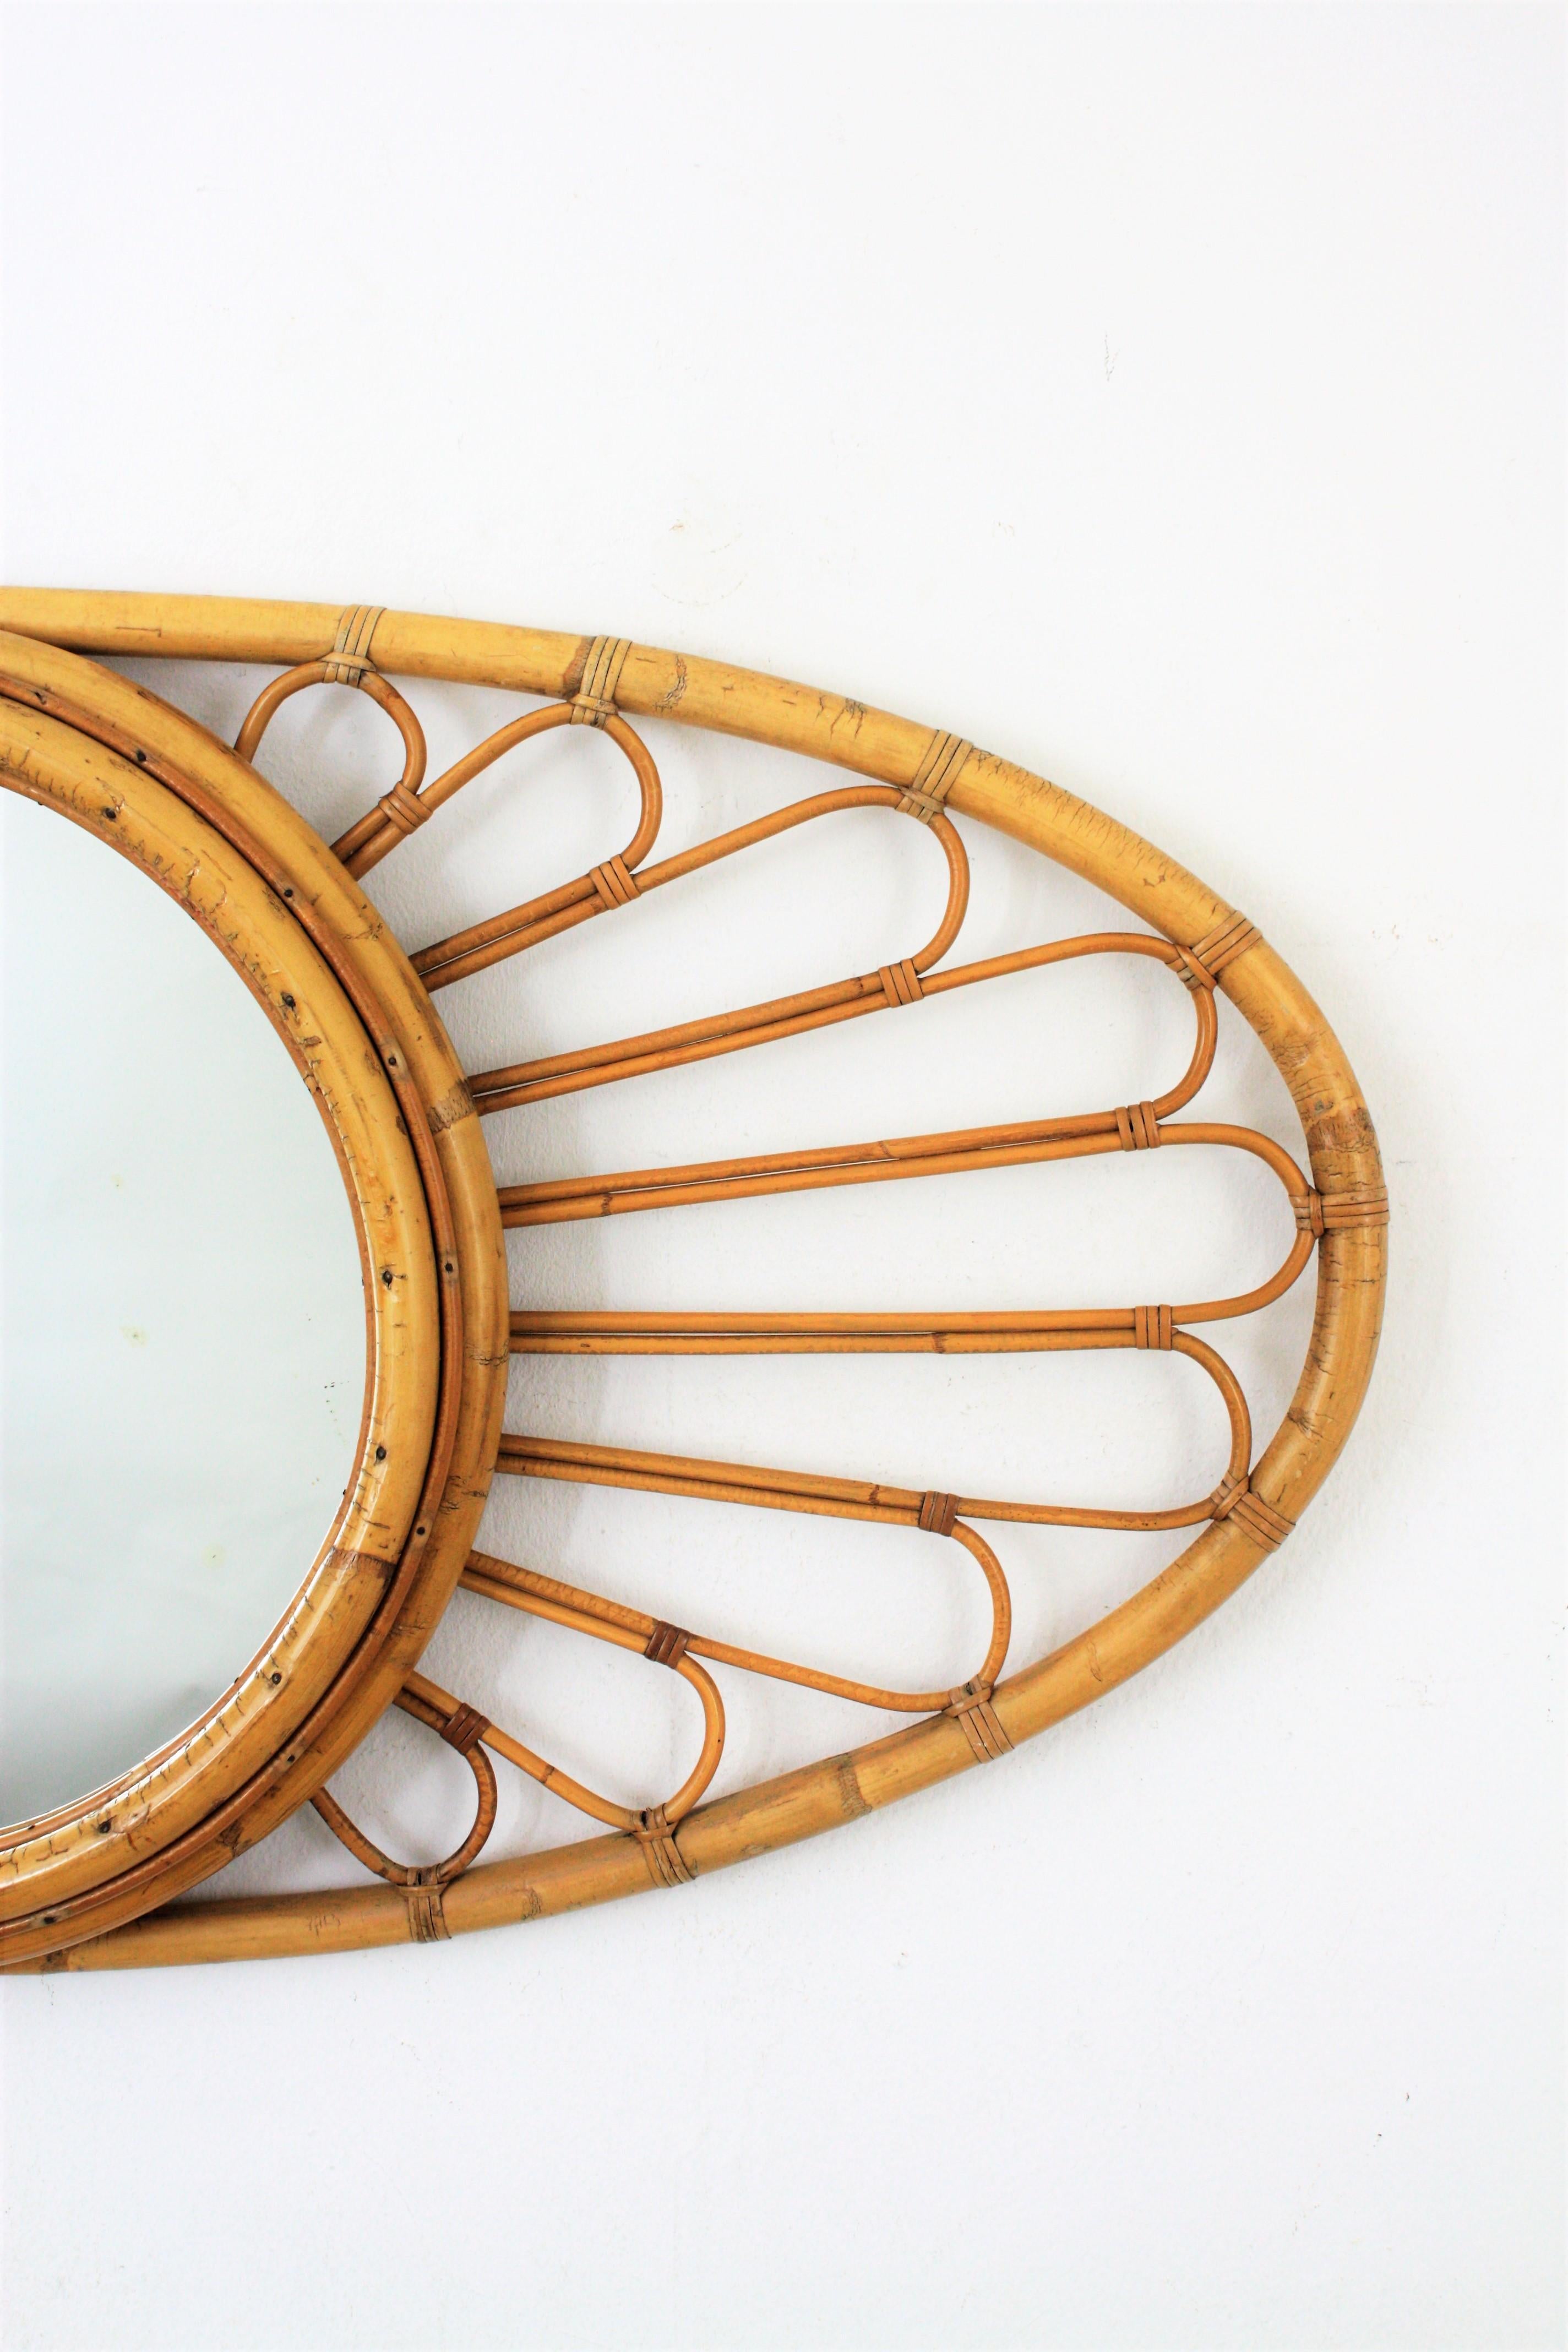 20th Century Bamboo Rattan Large Oval Mirror, Spain, 1960s For Sale